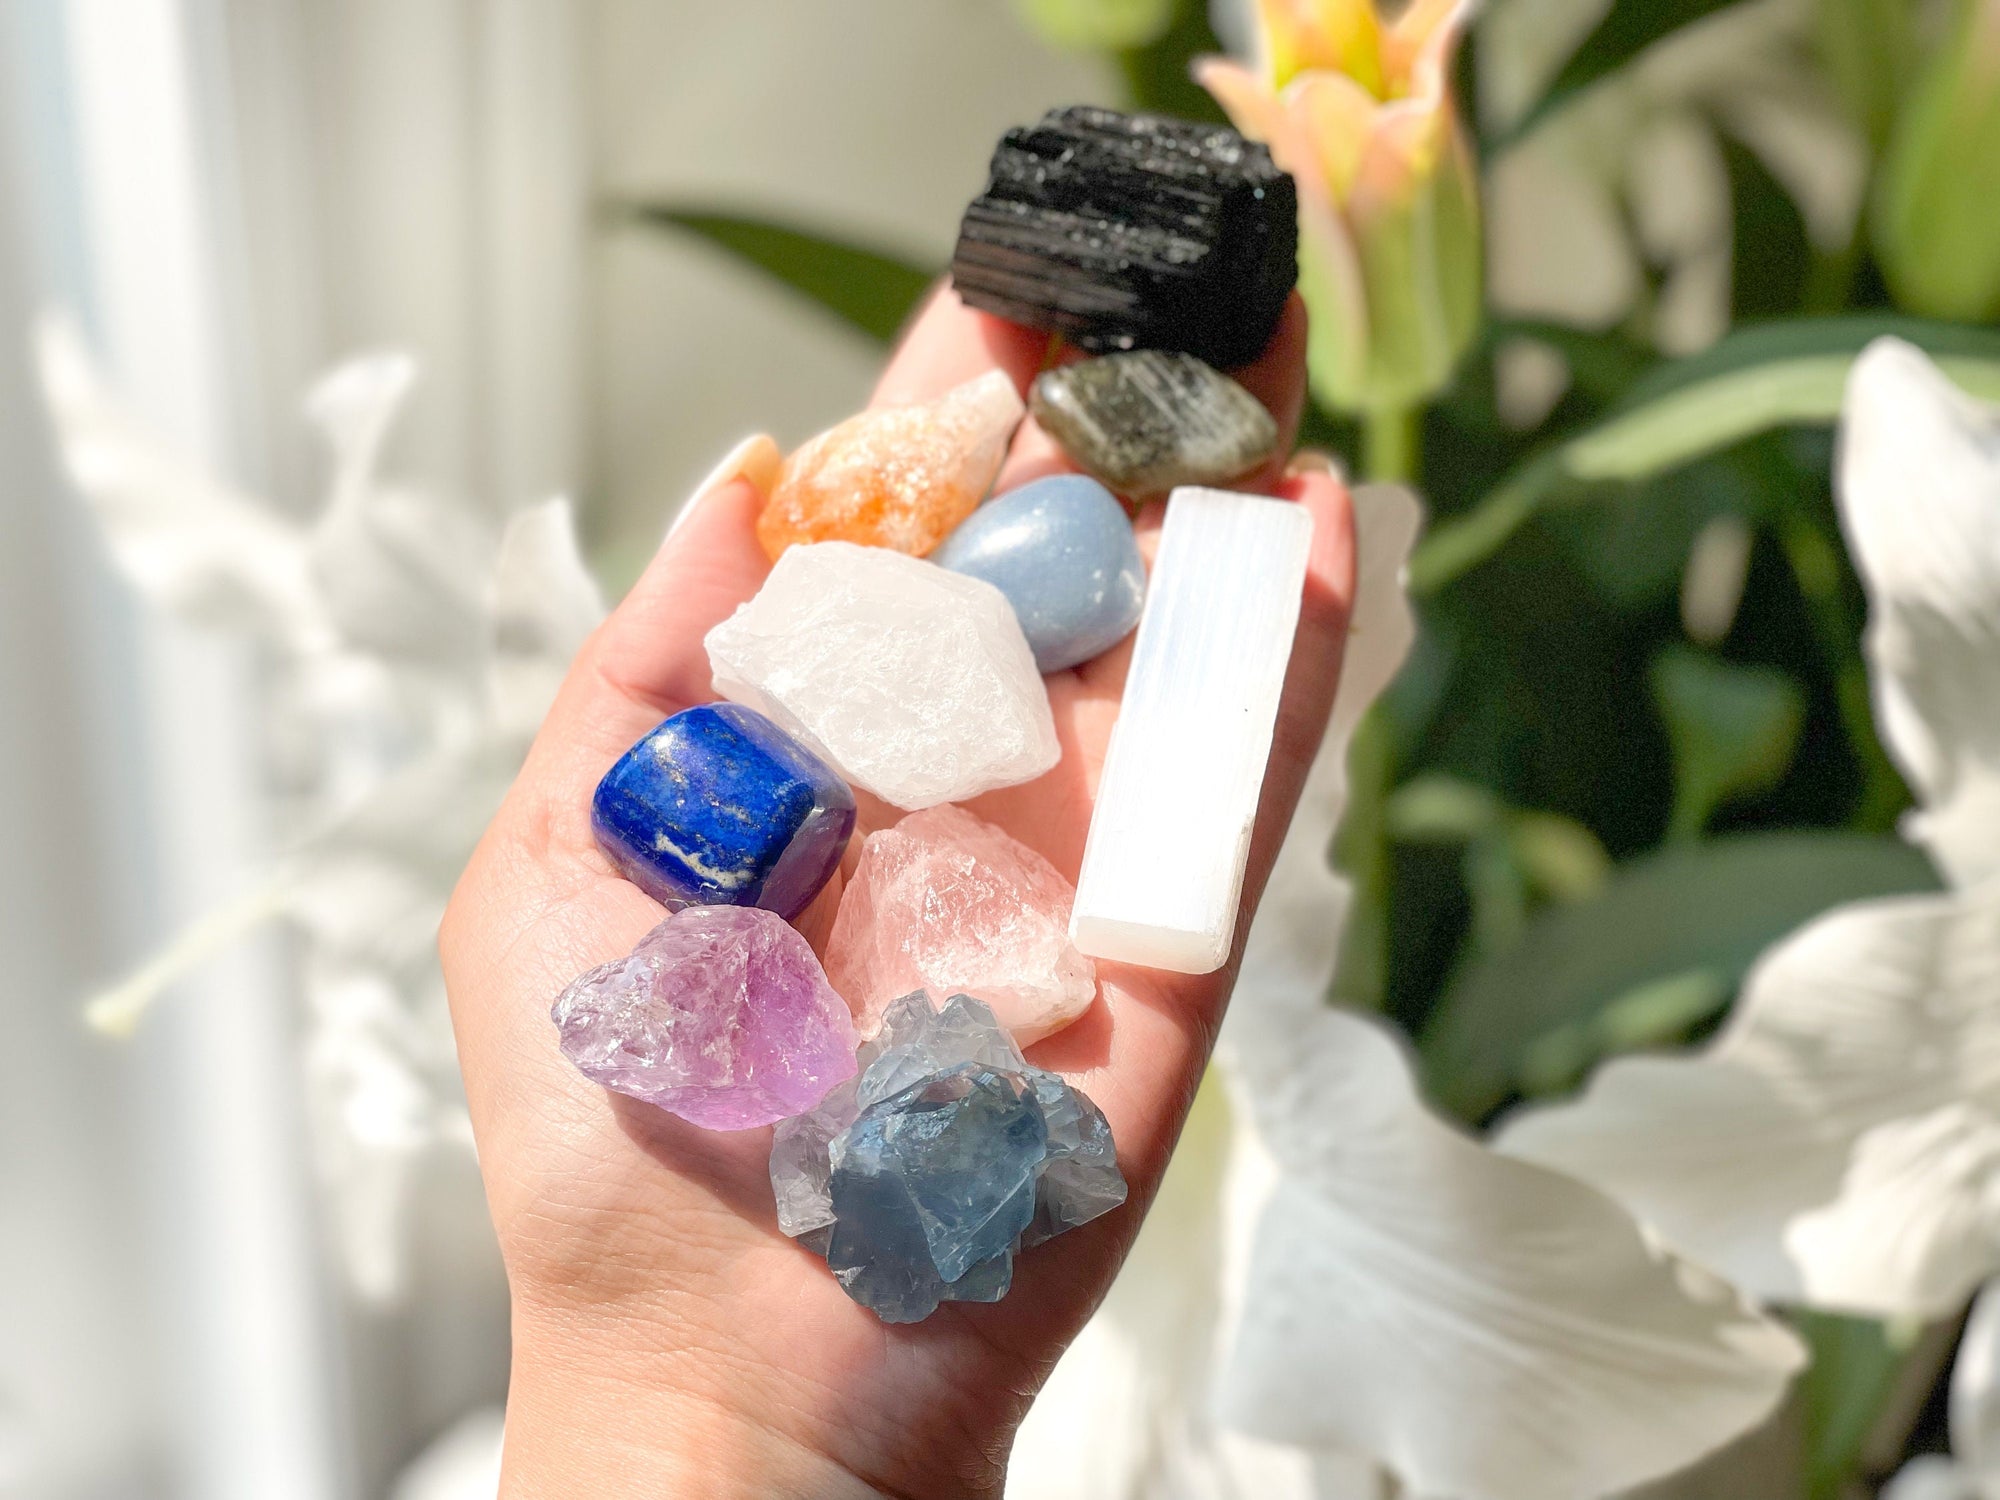 Ultimate Meditation Crystal Set: 10 Powerful Stones for Deep Relaxation, Spiritual Connection & Chakra Balancing - Cotton Pouch + Info Card